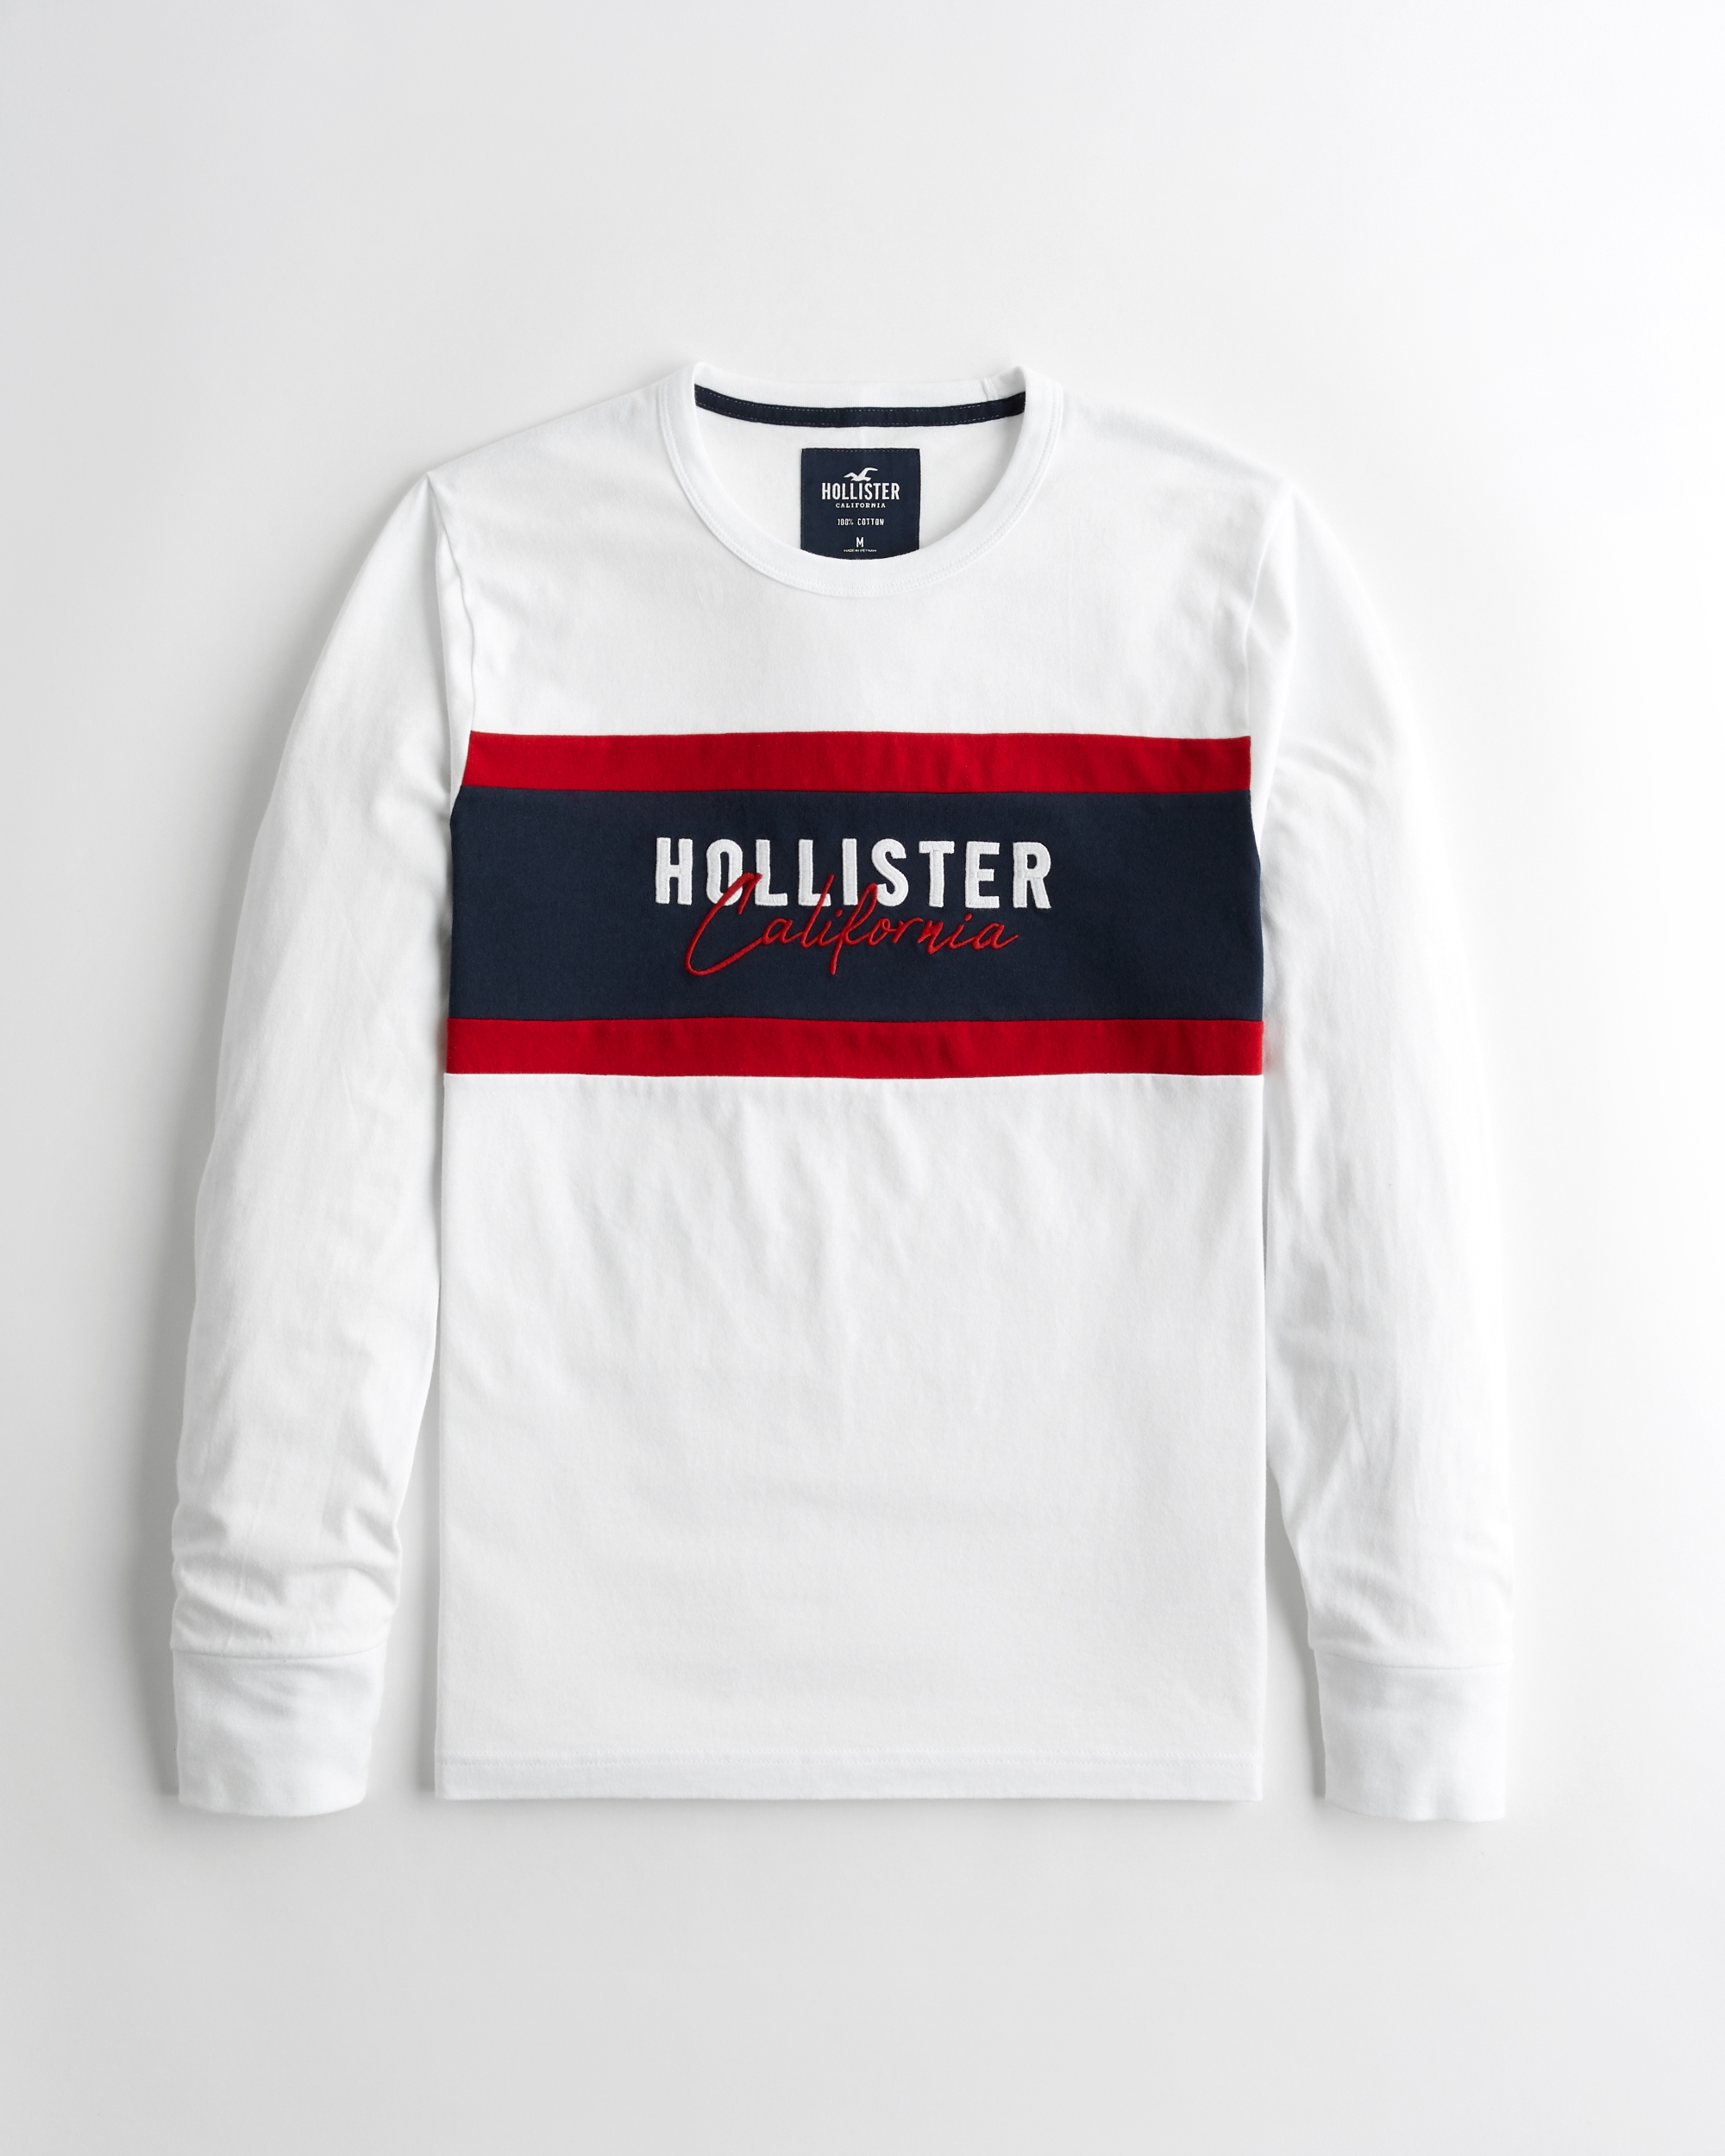 hollister return policy clearance